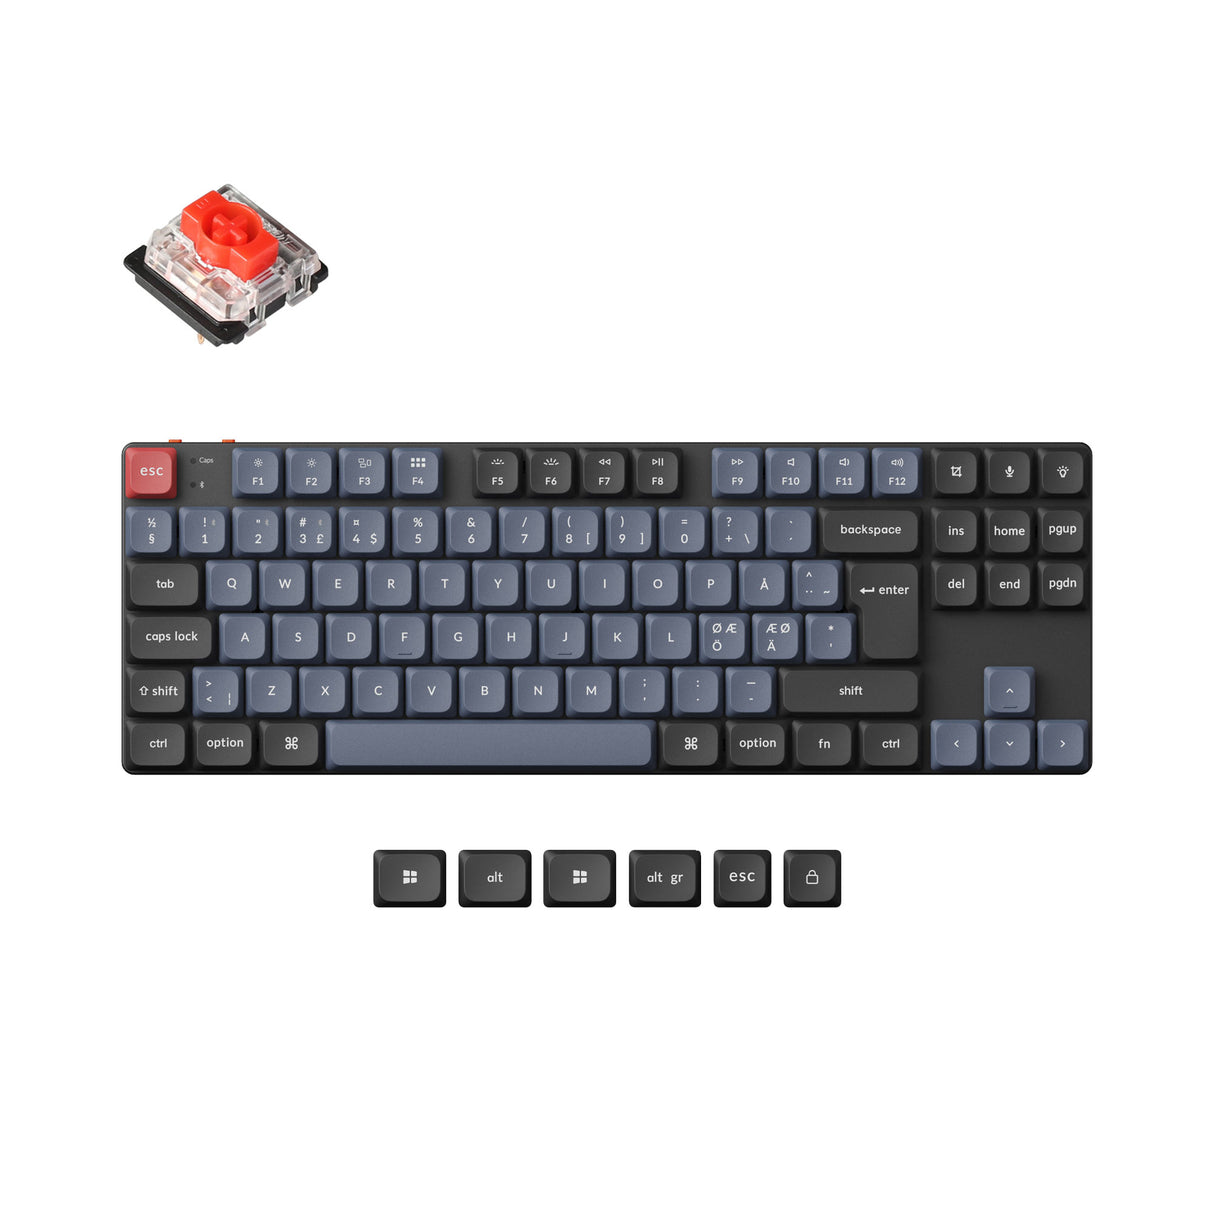 Keychron K1 Pro QMK VIA low profile custom mechanical keyboard TKL layout PBT Keycaps hot-swappable Gateron low profile switch red ISO Nordic layout